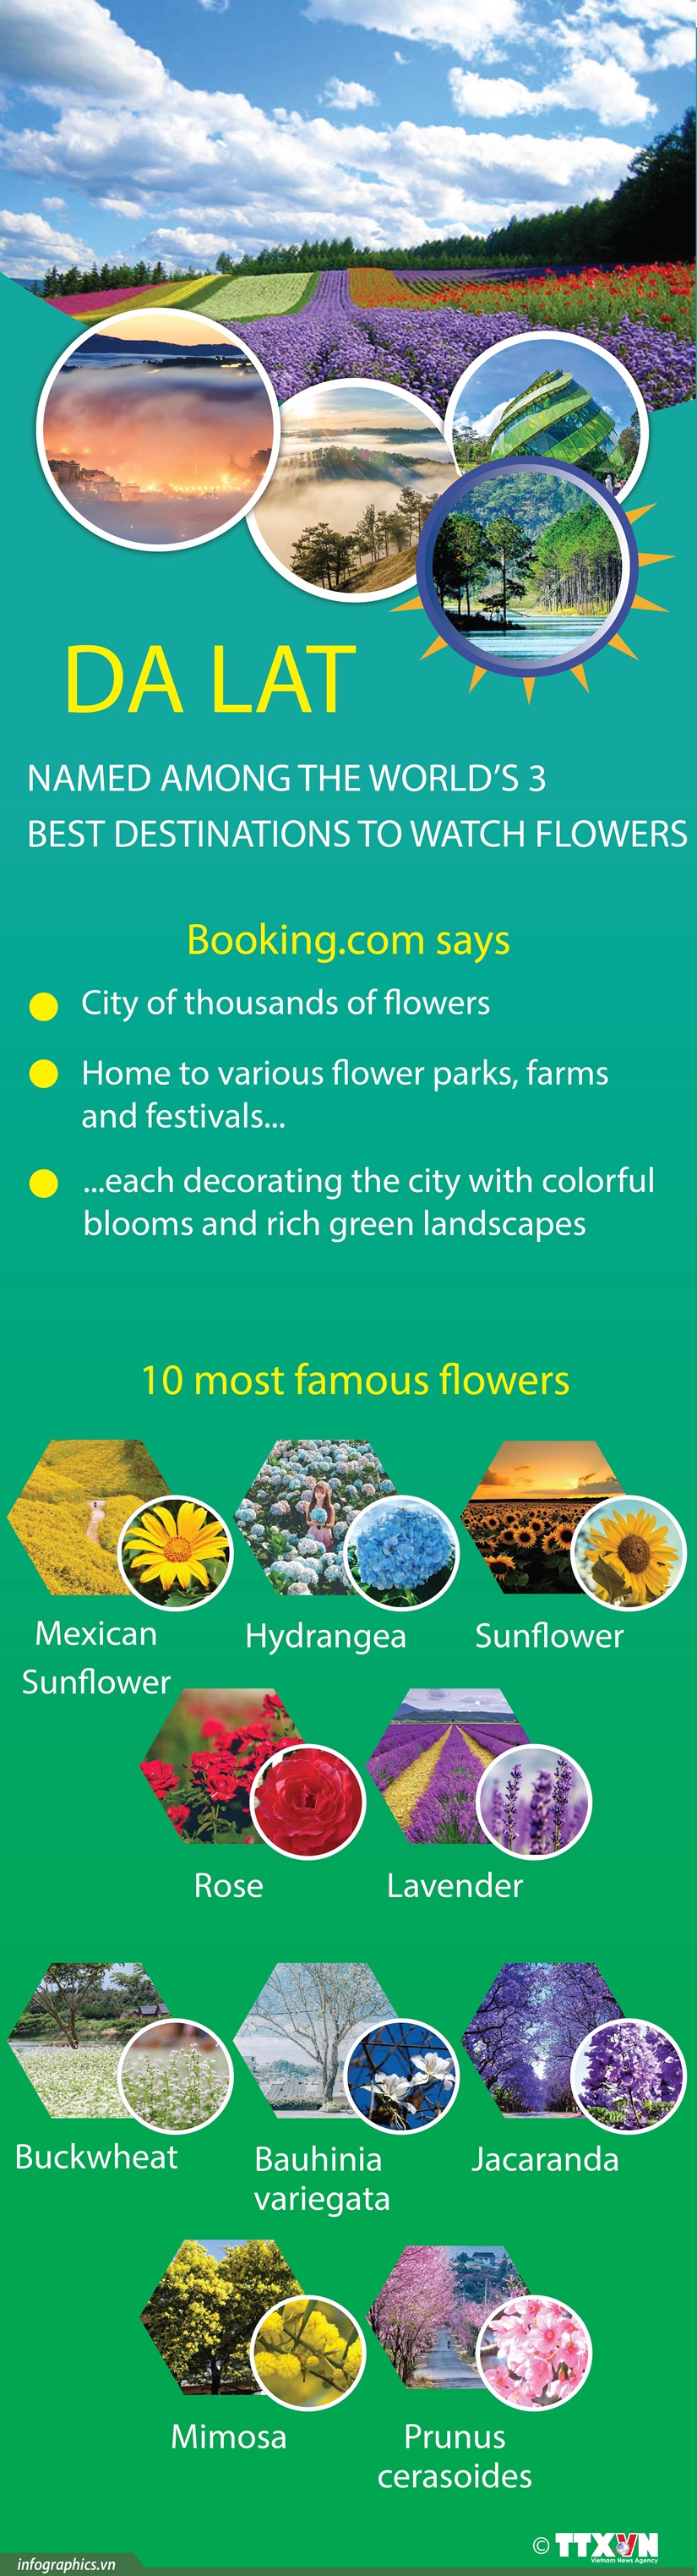 Da Lat among world's top destinations for flowers hinh anh 1